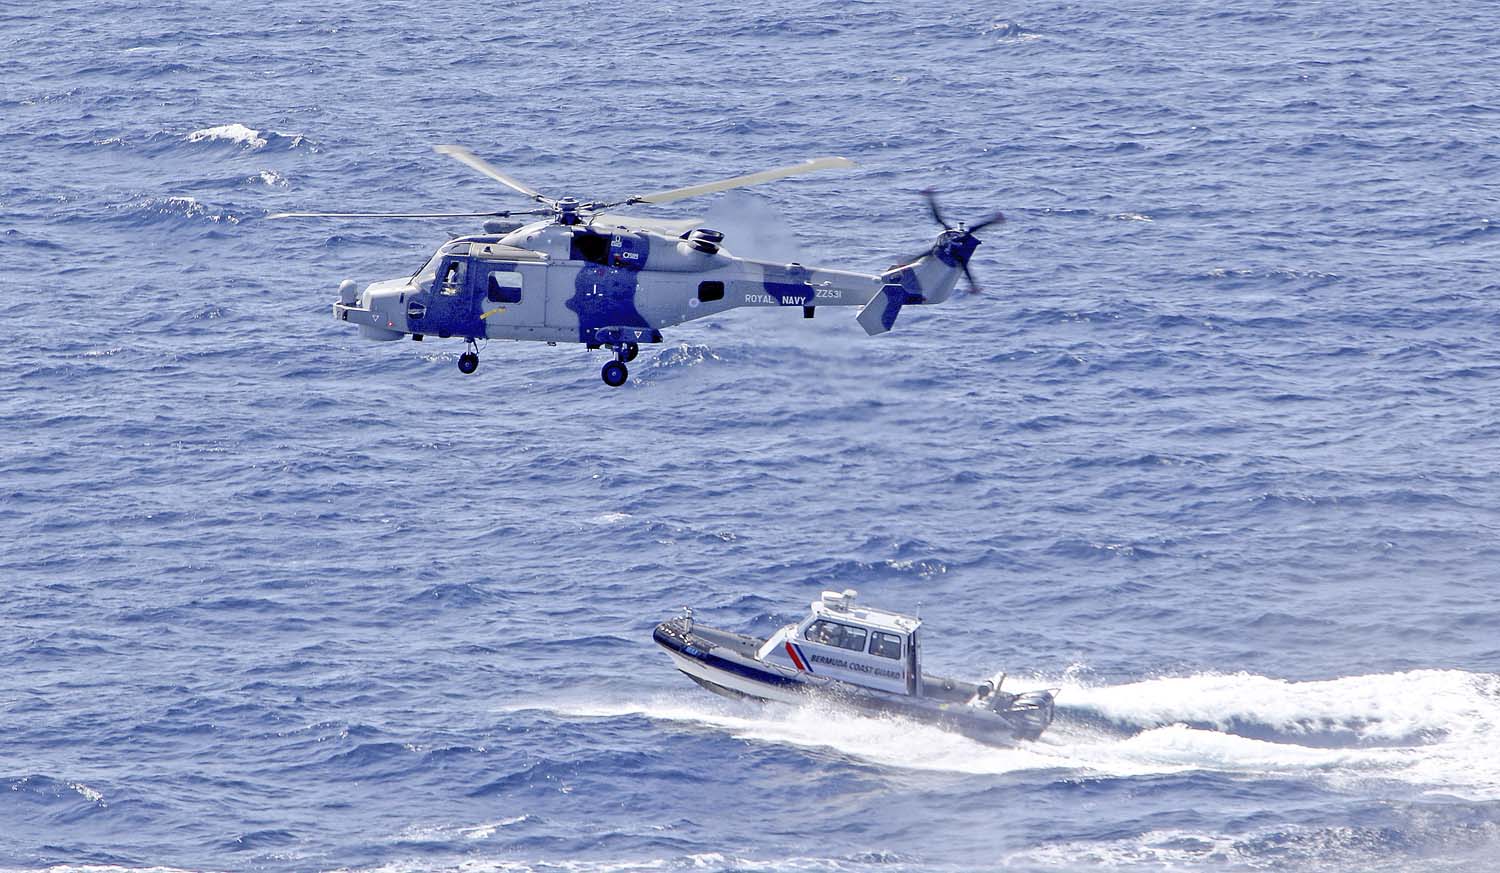 Wildcat helicopter carry out recce sorties over Bermuda